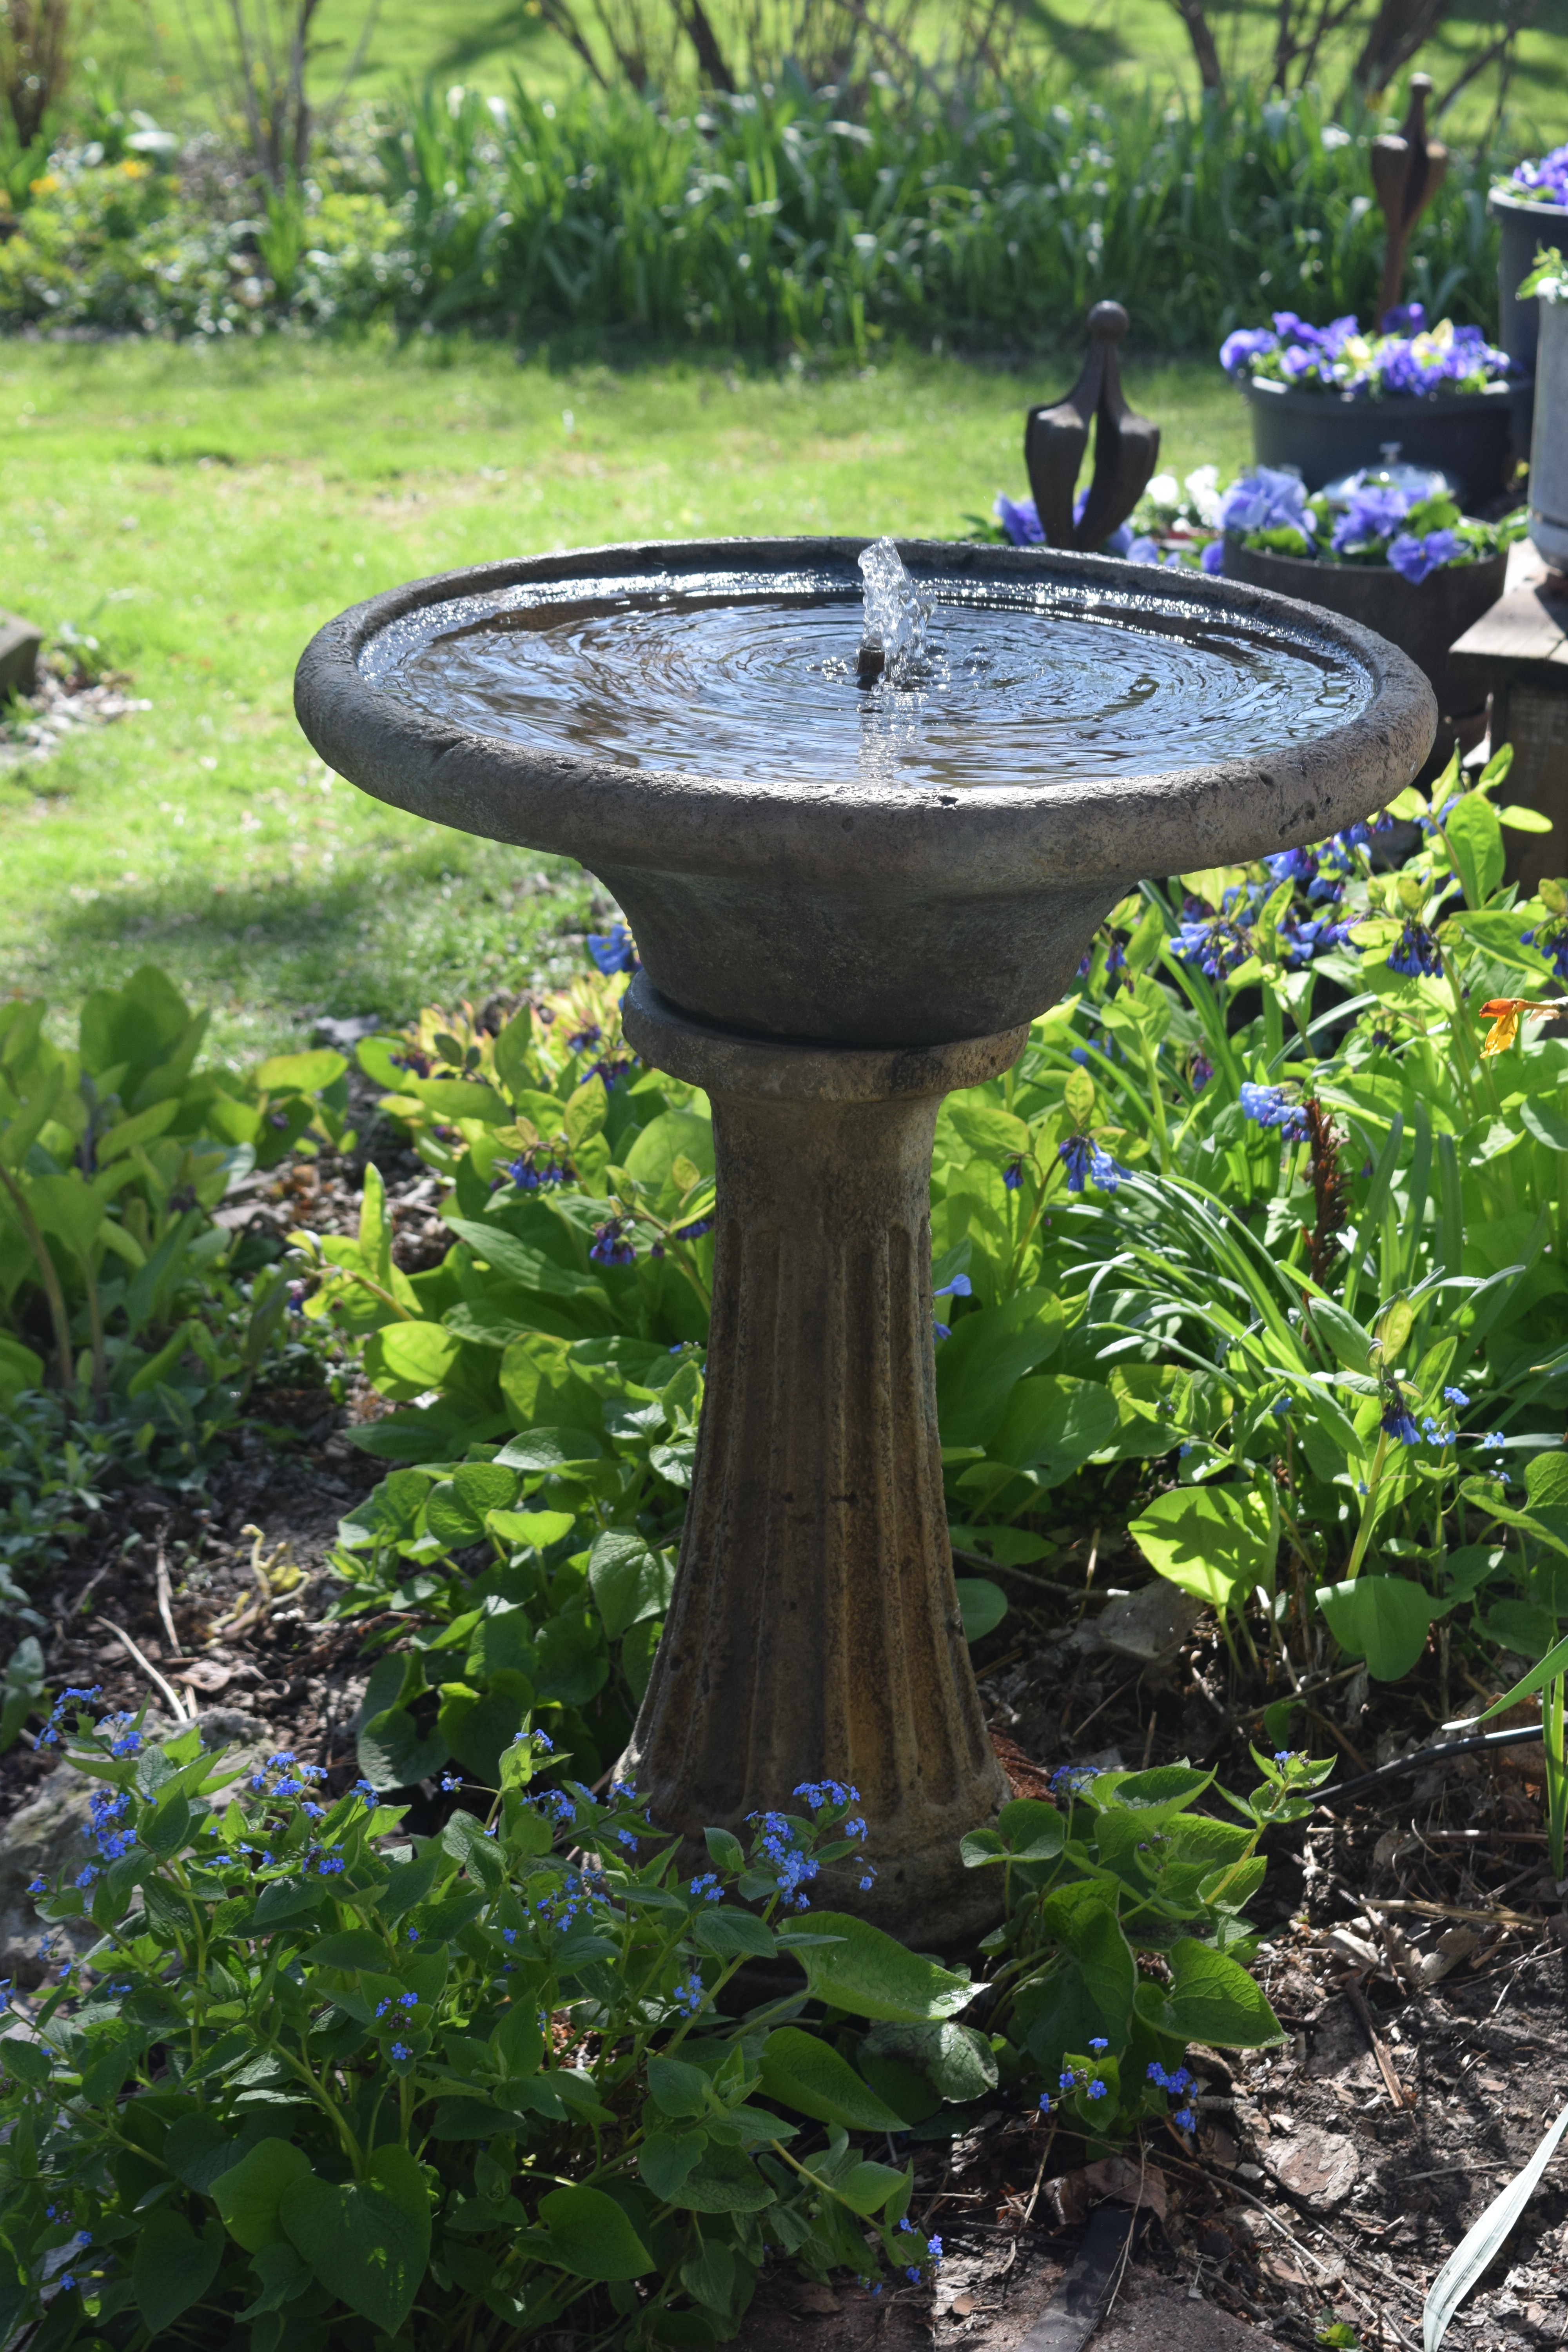 Image of Birdbath surrounded by wood chips